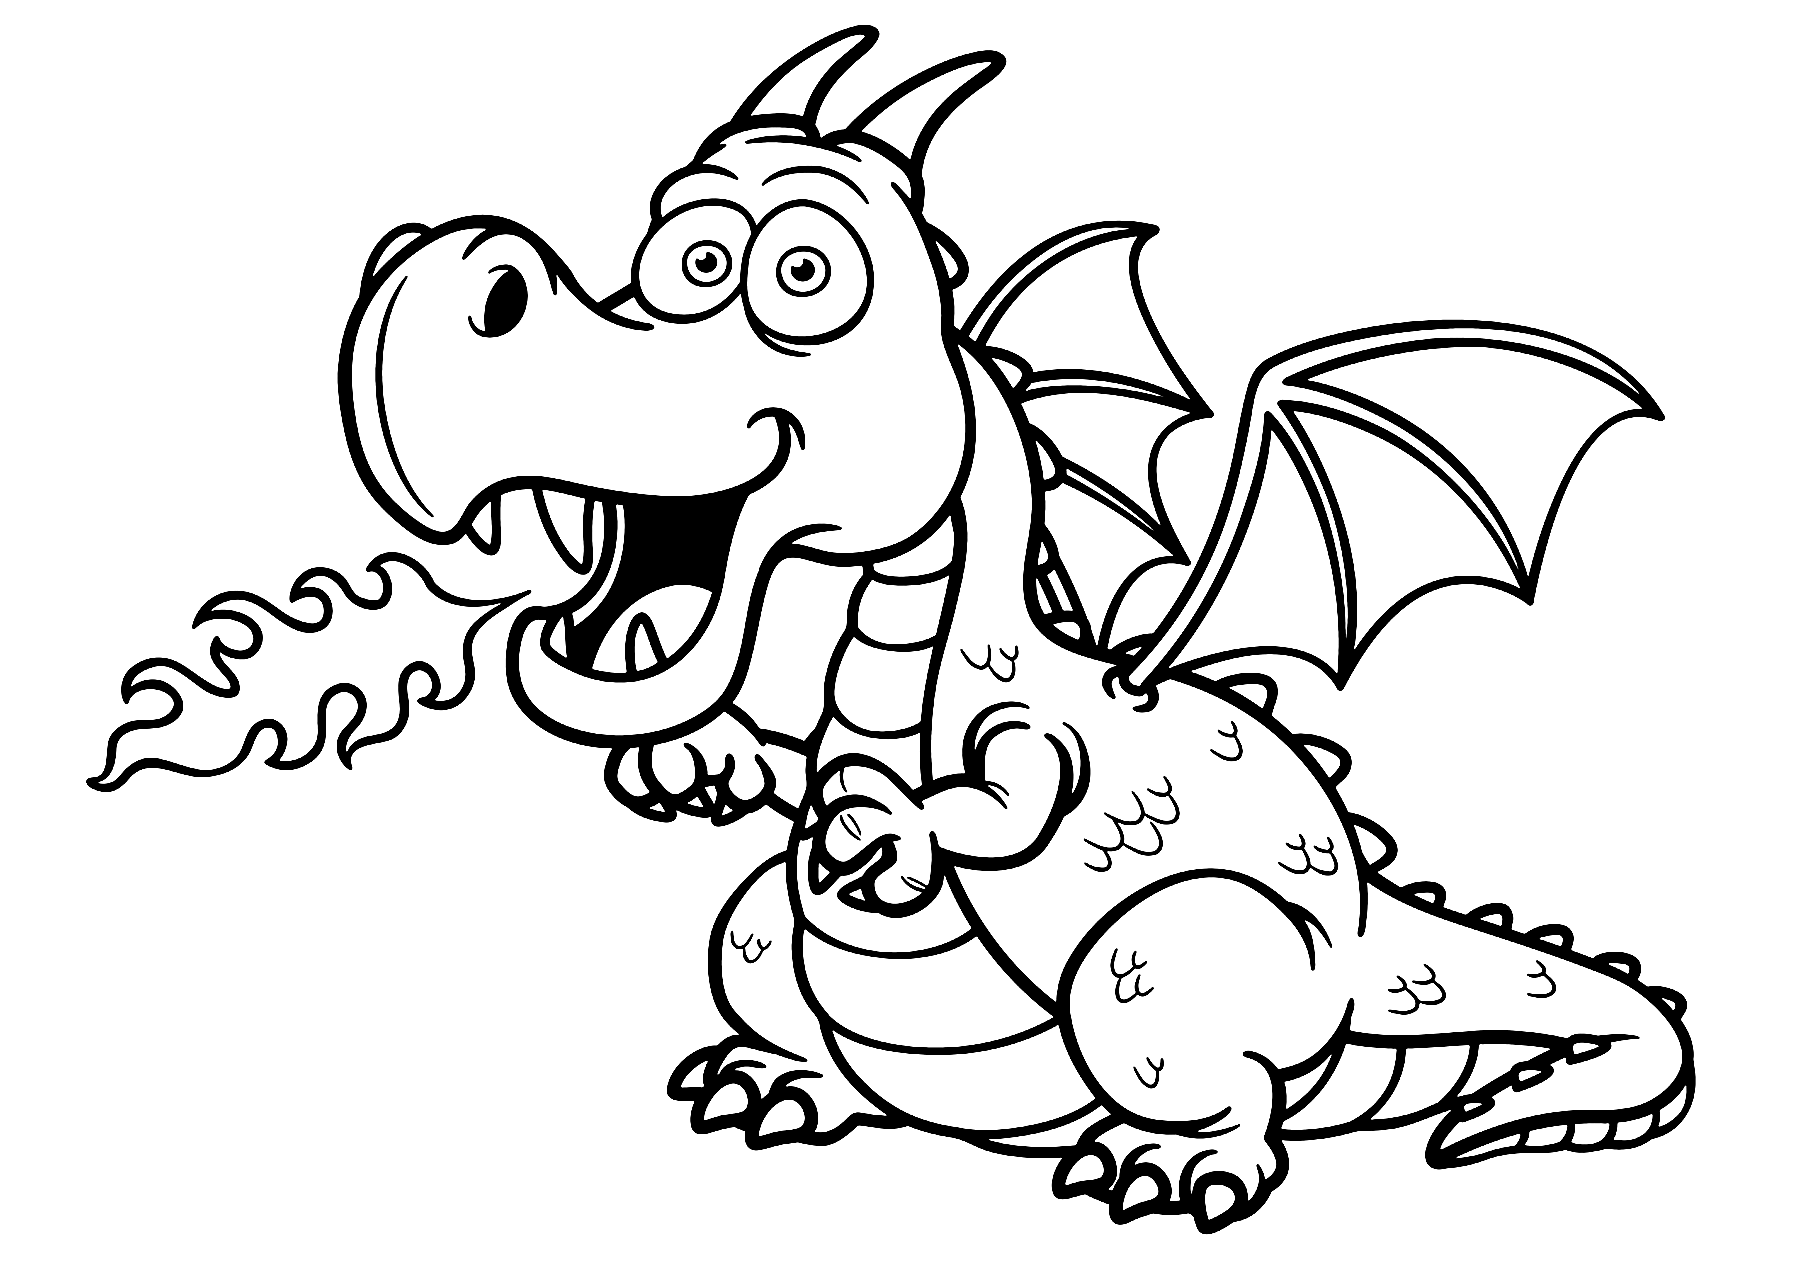 Magical Fire Breathing Cartoon Dragon Coloring Page